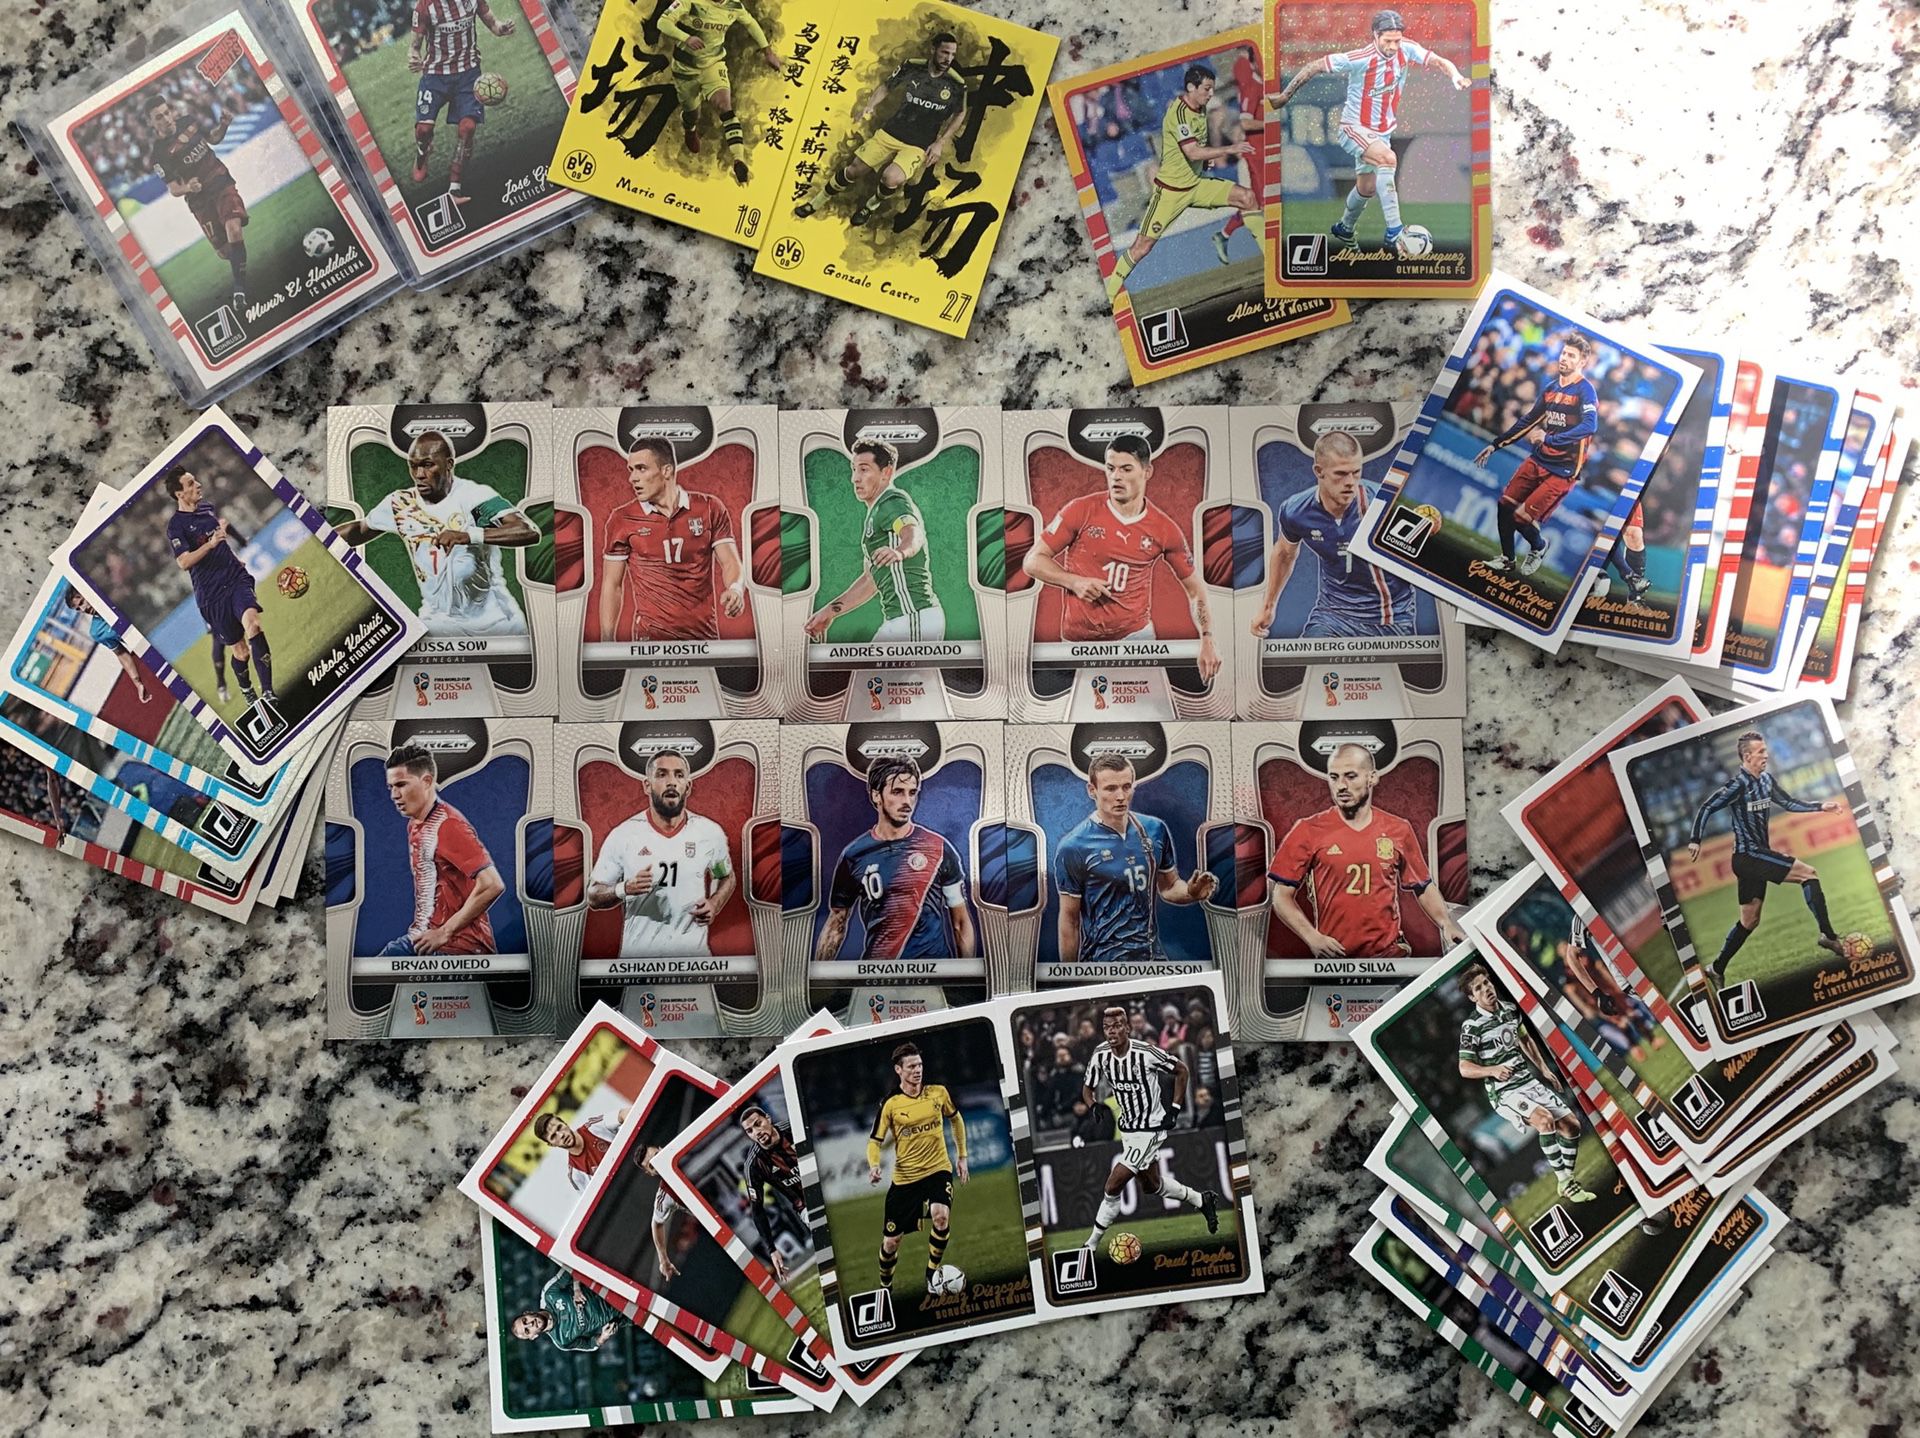 2018 Prizm W/C, Donruss Gold and Holo Rookies, Daka and More Soccer Card Lot